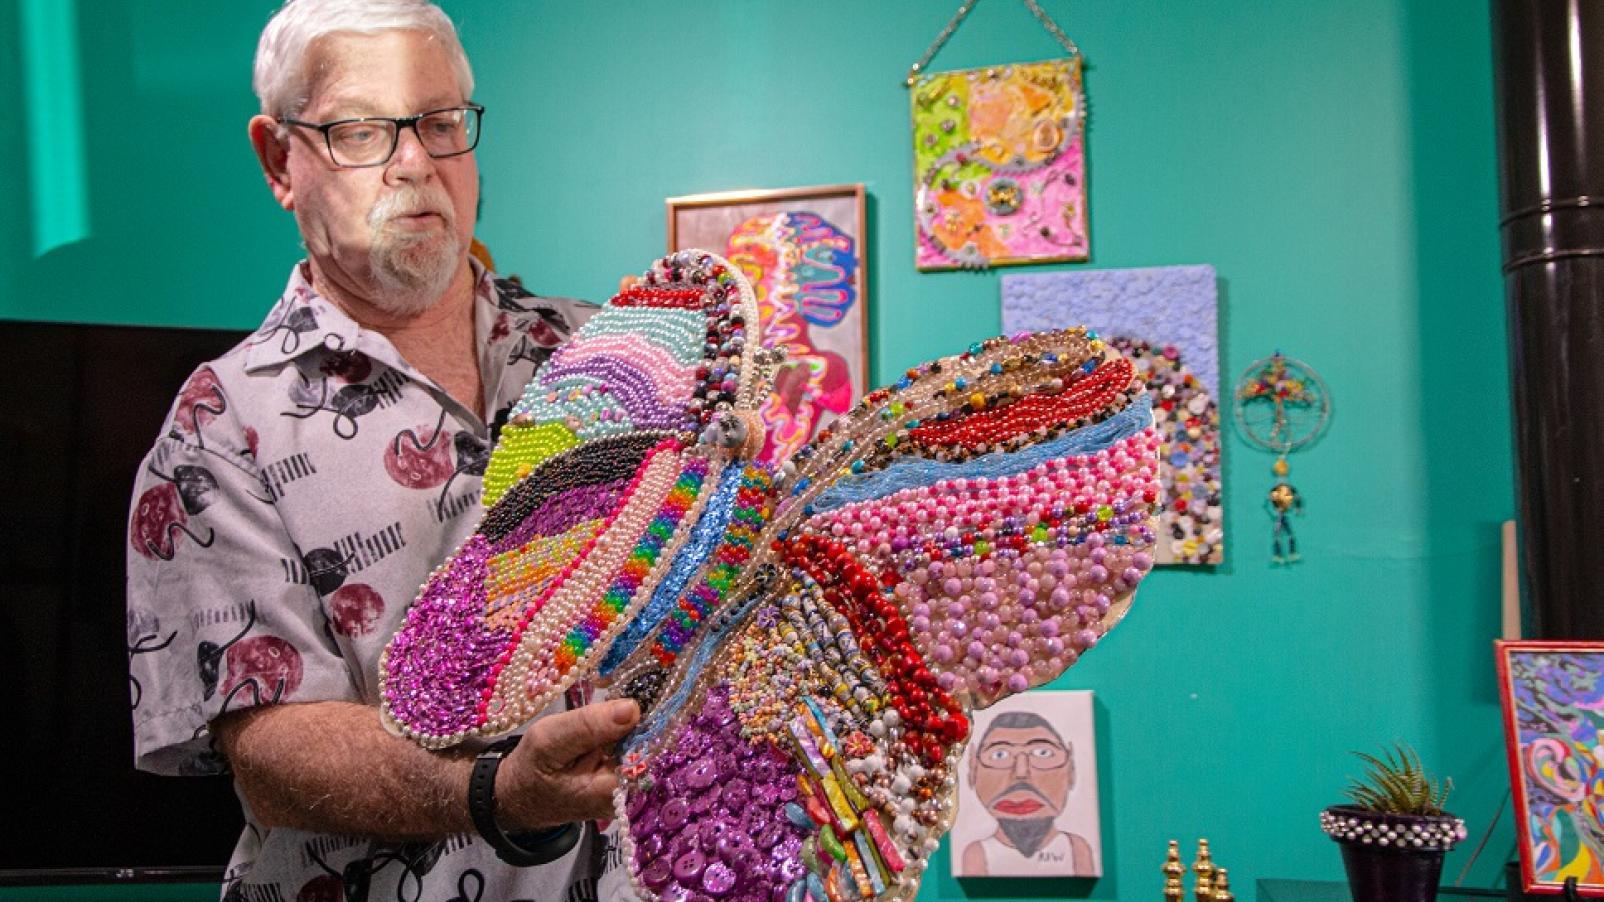 A man holding some sort of home made artwork resembling a butterfly